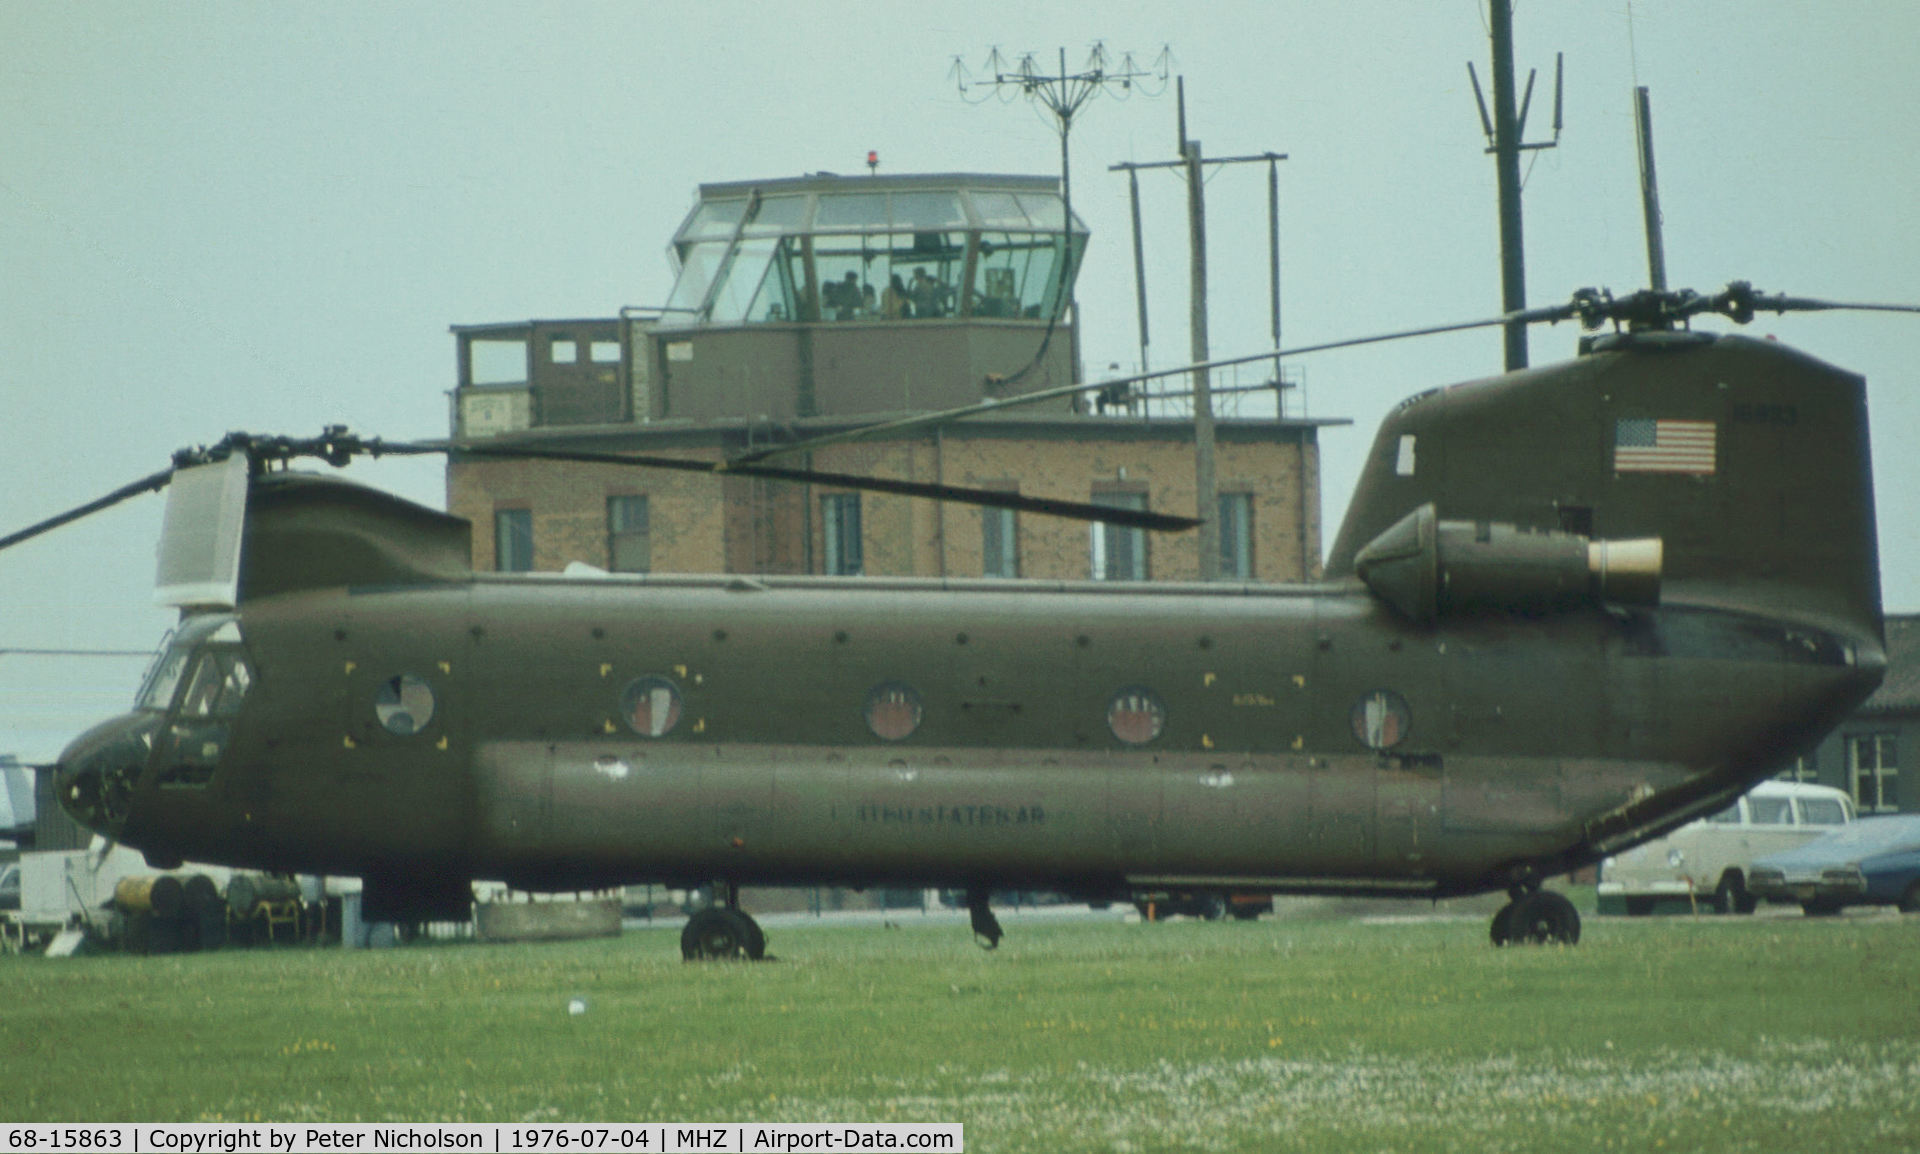 68-15863, 1968 Boeing Vertol CH-47C Chinook C/N B.575, CH-47C Chinook of the United States Army's 180th Aviation Company on display at the 1976 RAF Mildenhall Air Fete. This Chinook was later re-built as CH-47 89-0148.